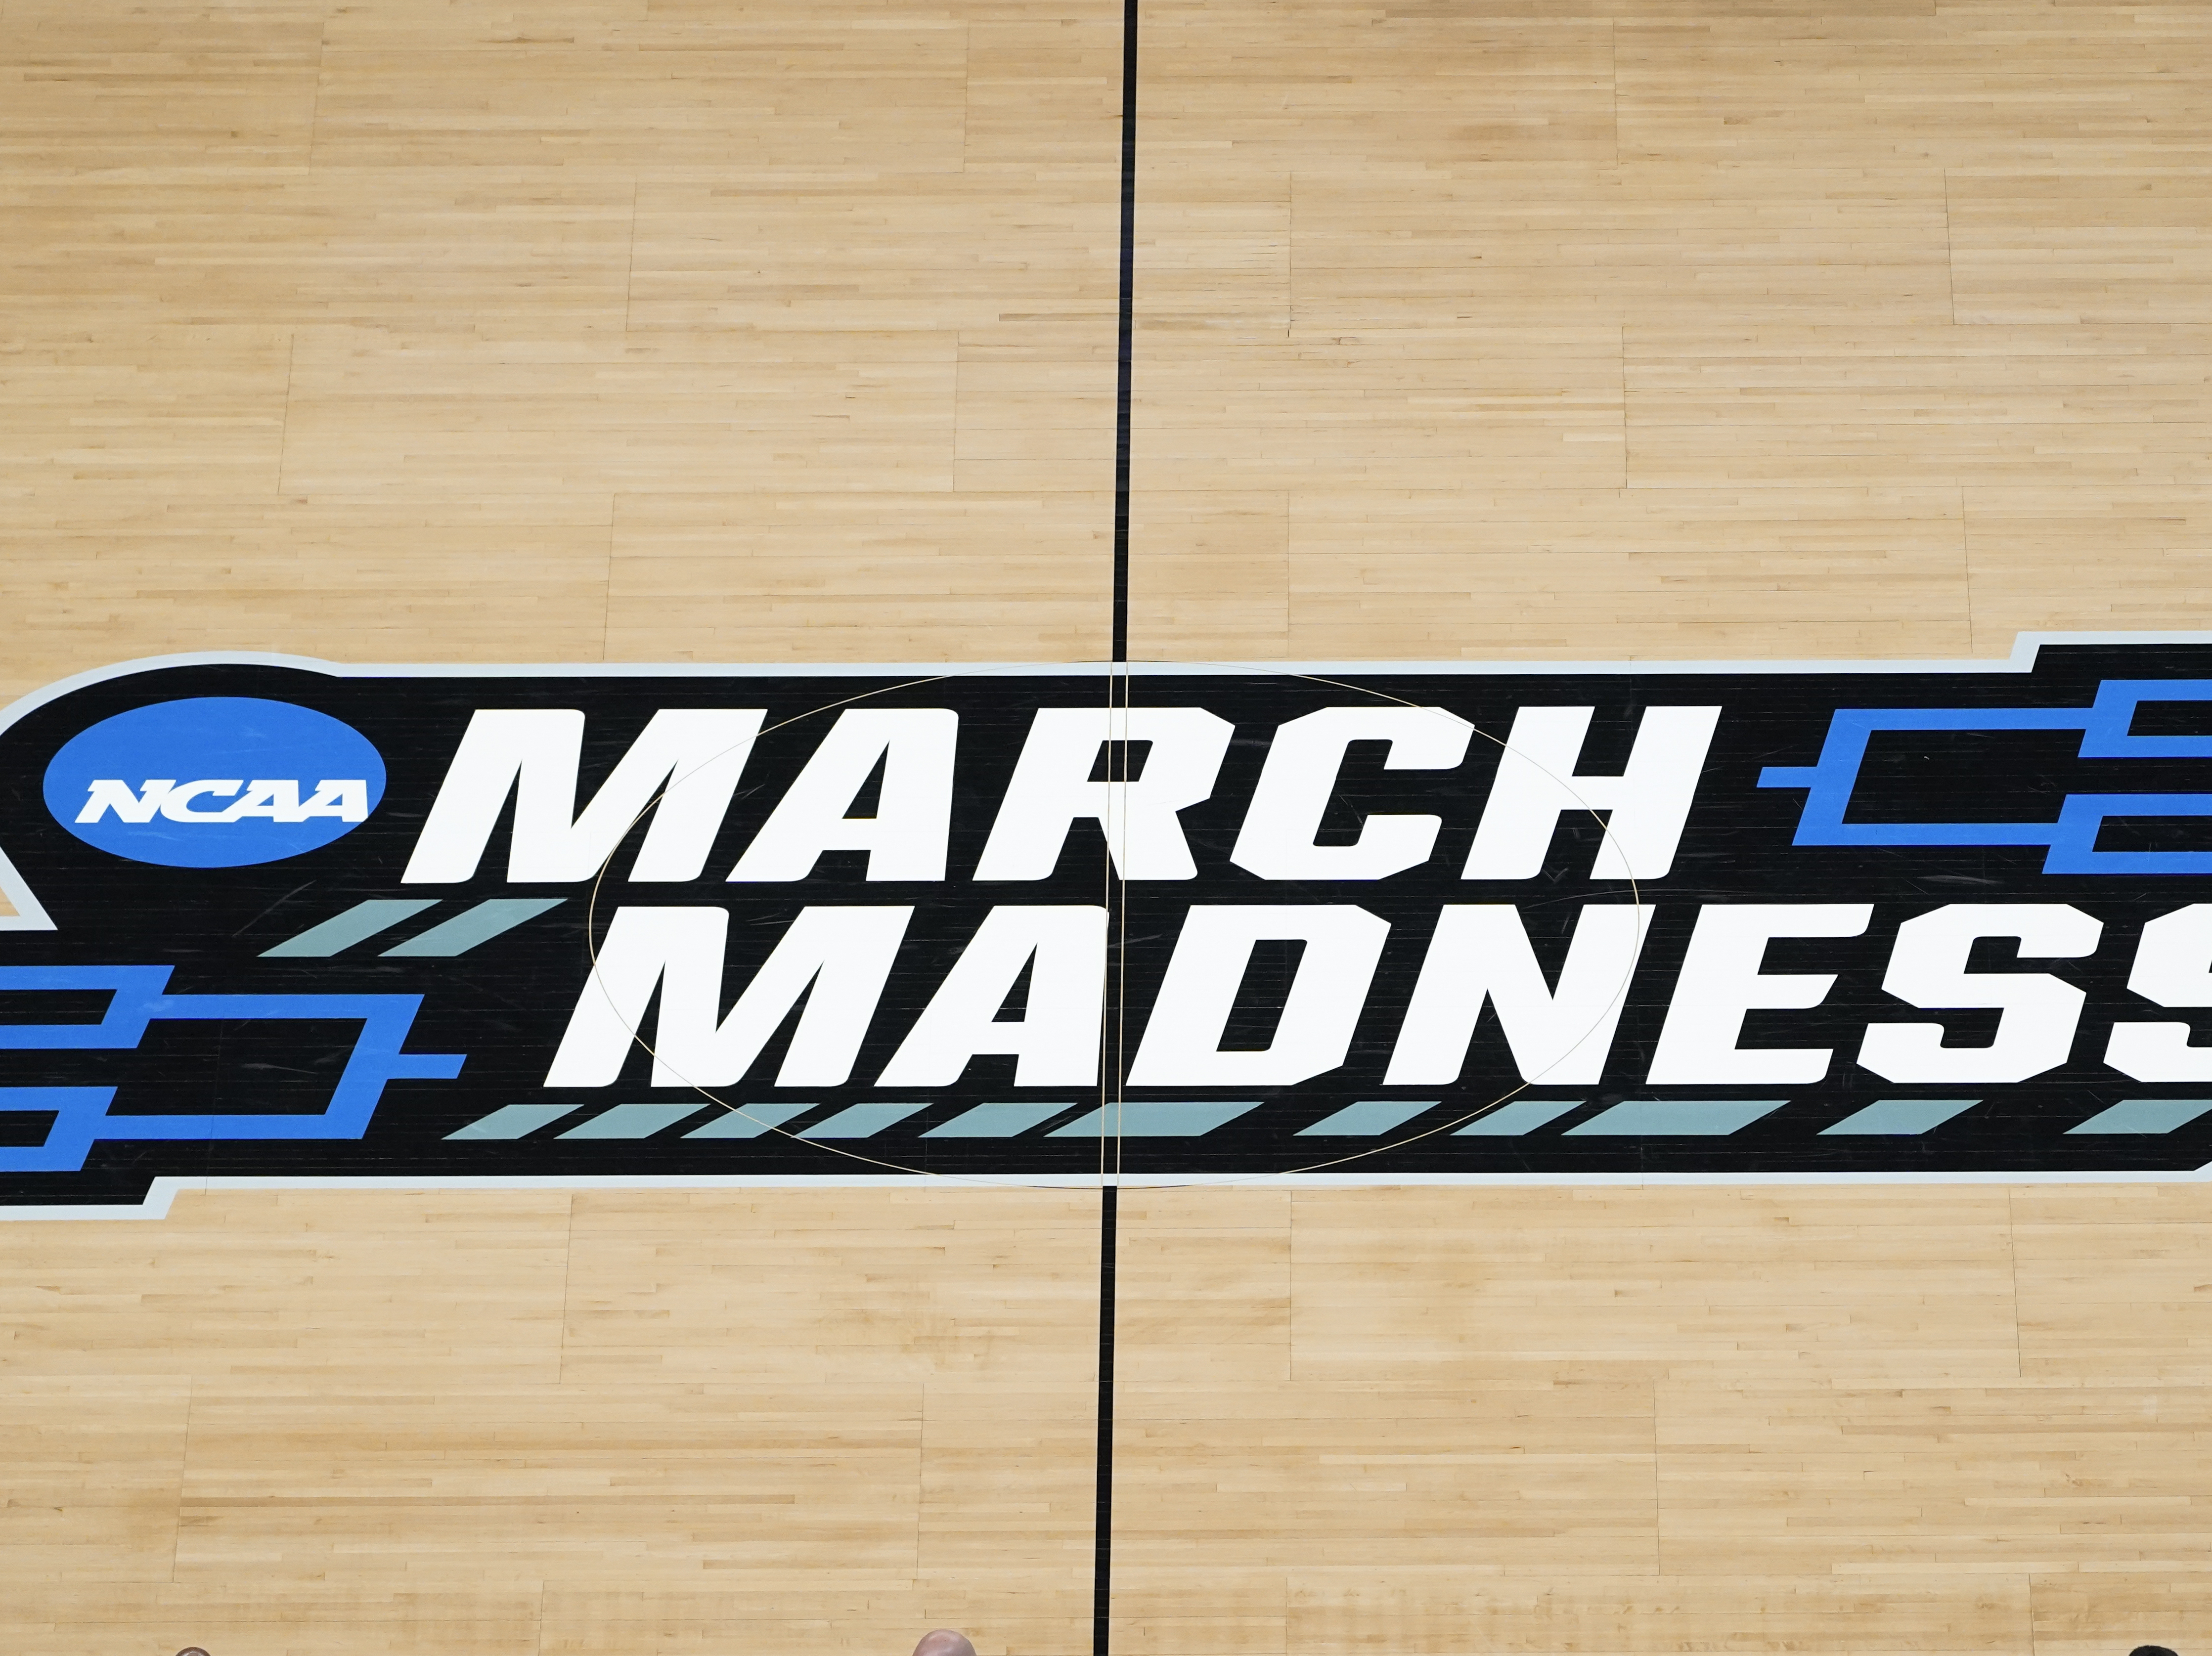 The March Madness logo on the court during a men's college basketball game during the NCAA tournament in Indianapolis. The Supreme Court has eroded the difference between elite college athletes and professional sports stars.